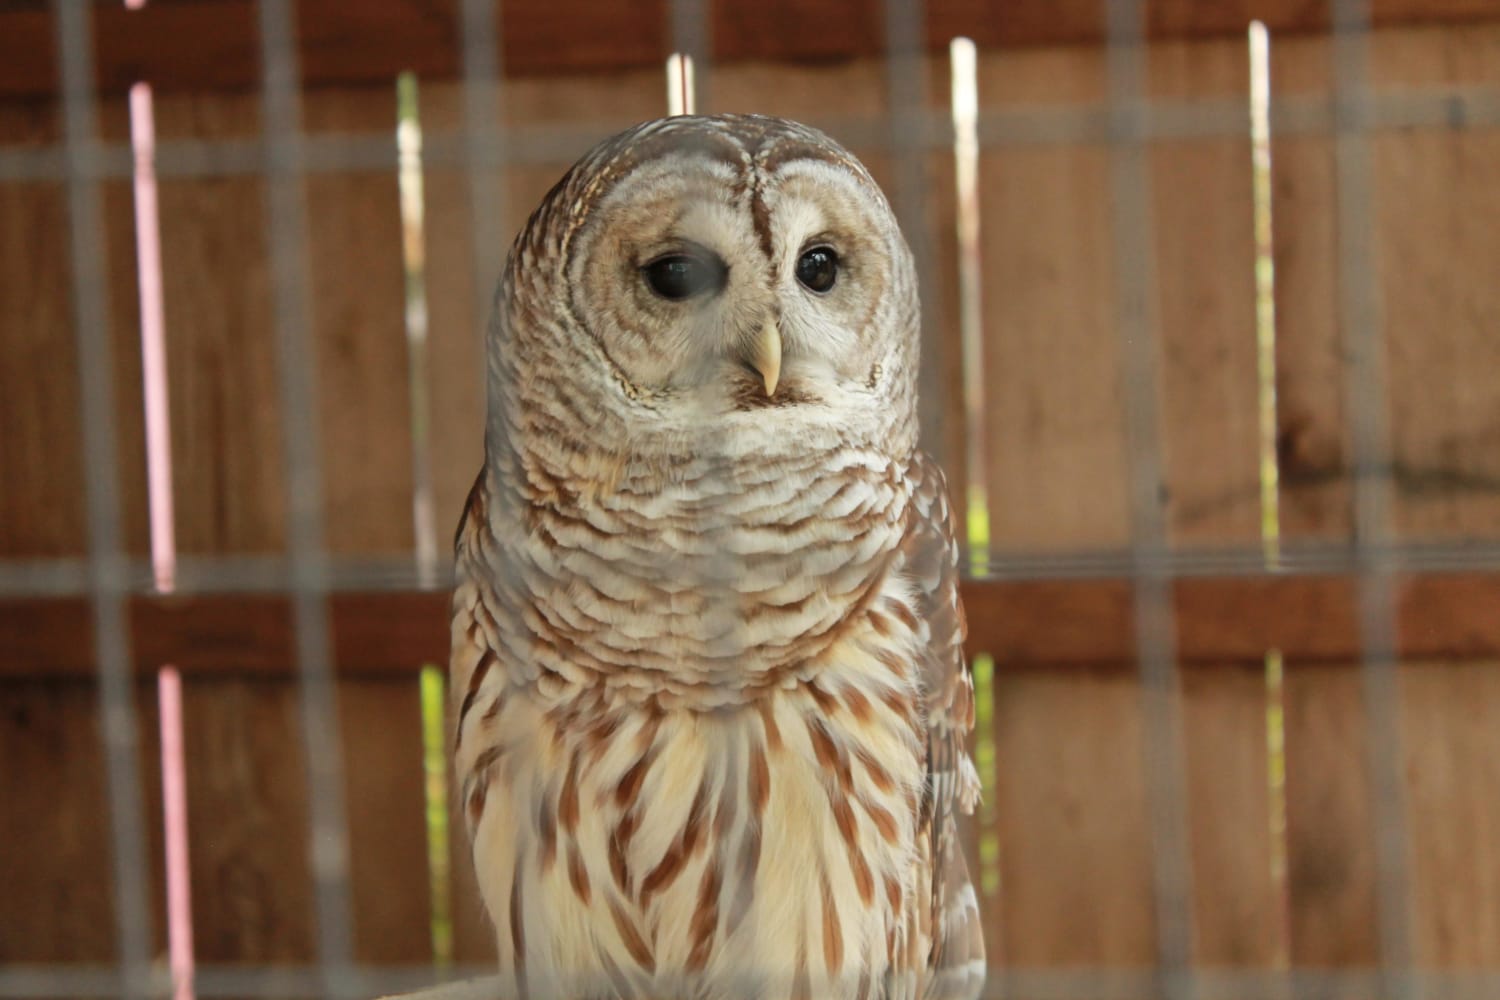 I was practicing photography today and got a nice picture of a Barred Owl.